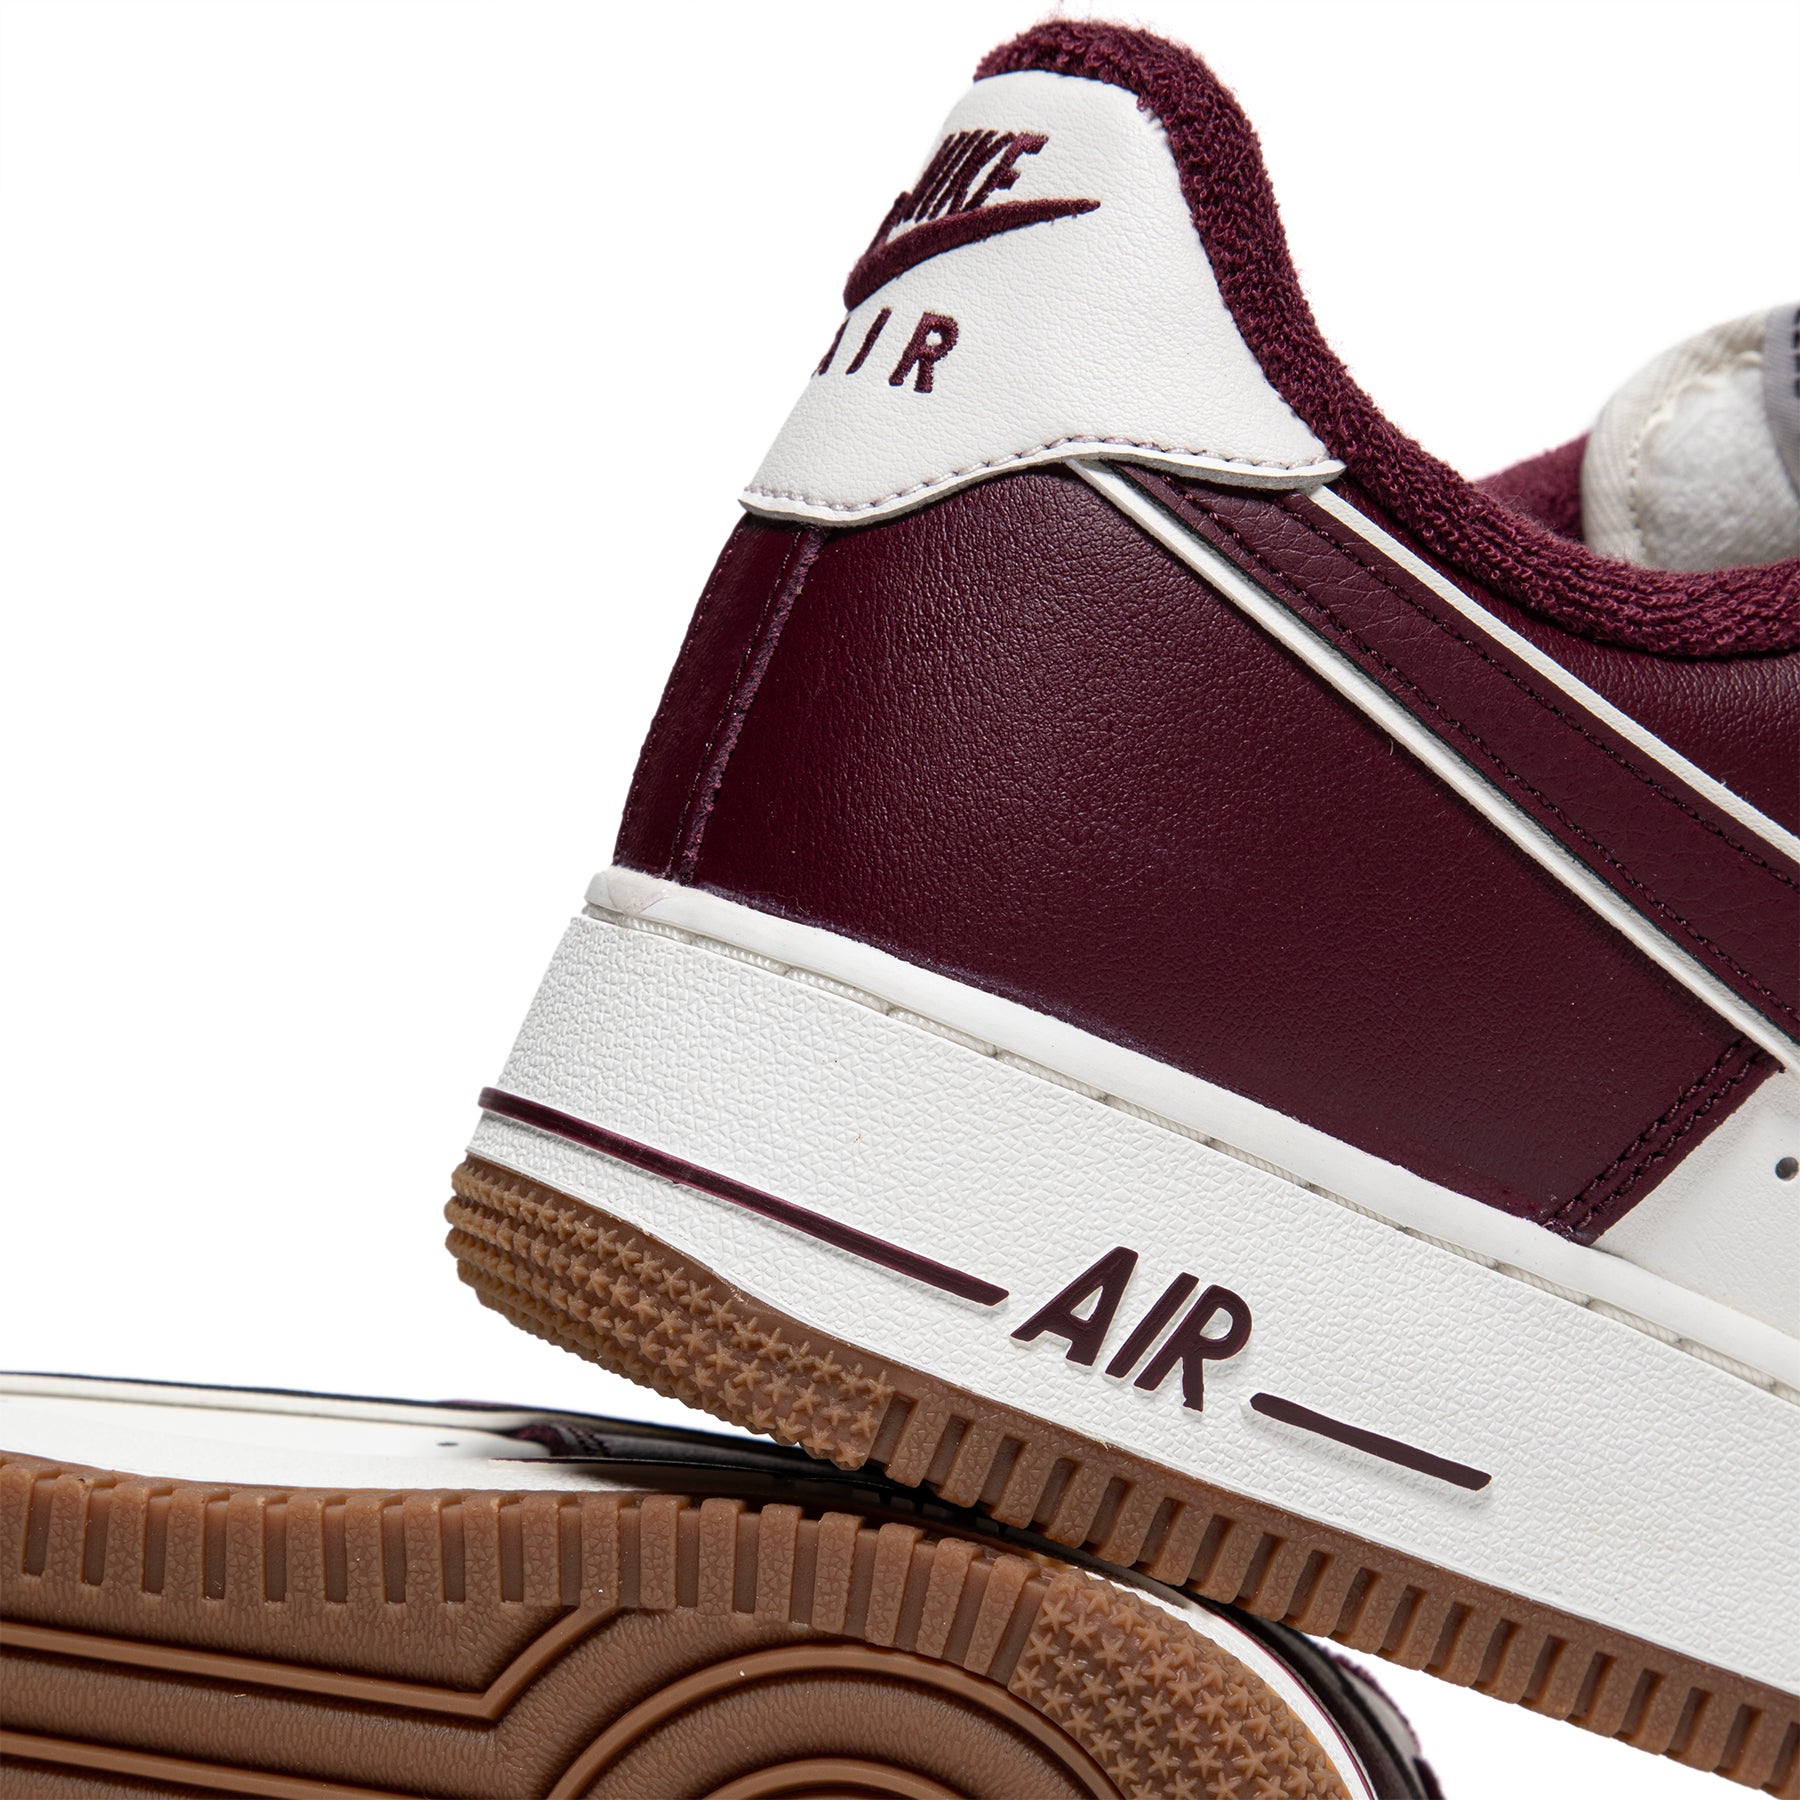 Nike Men's Air Force 1 '07 Lv8 Shoes In Sail/night Maroon/gum